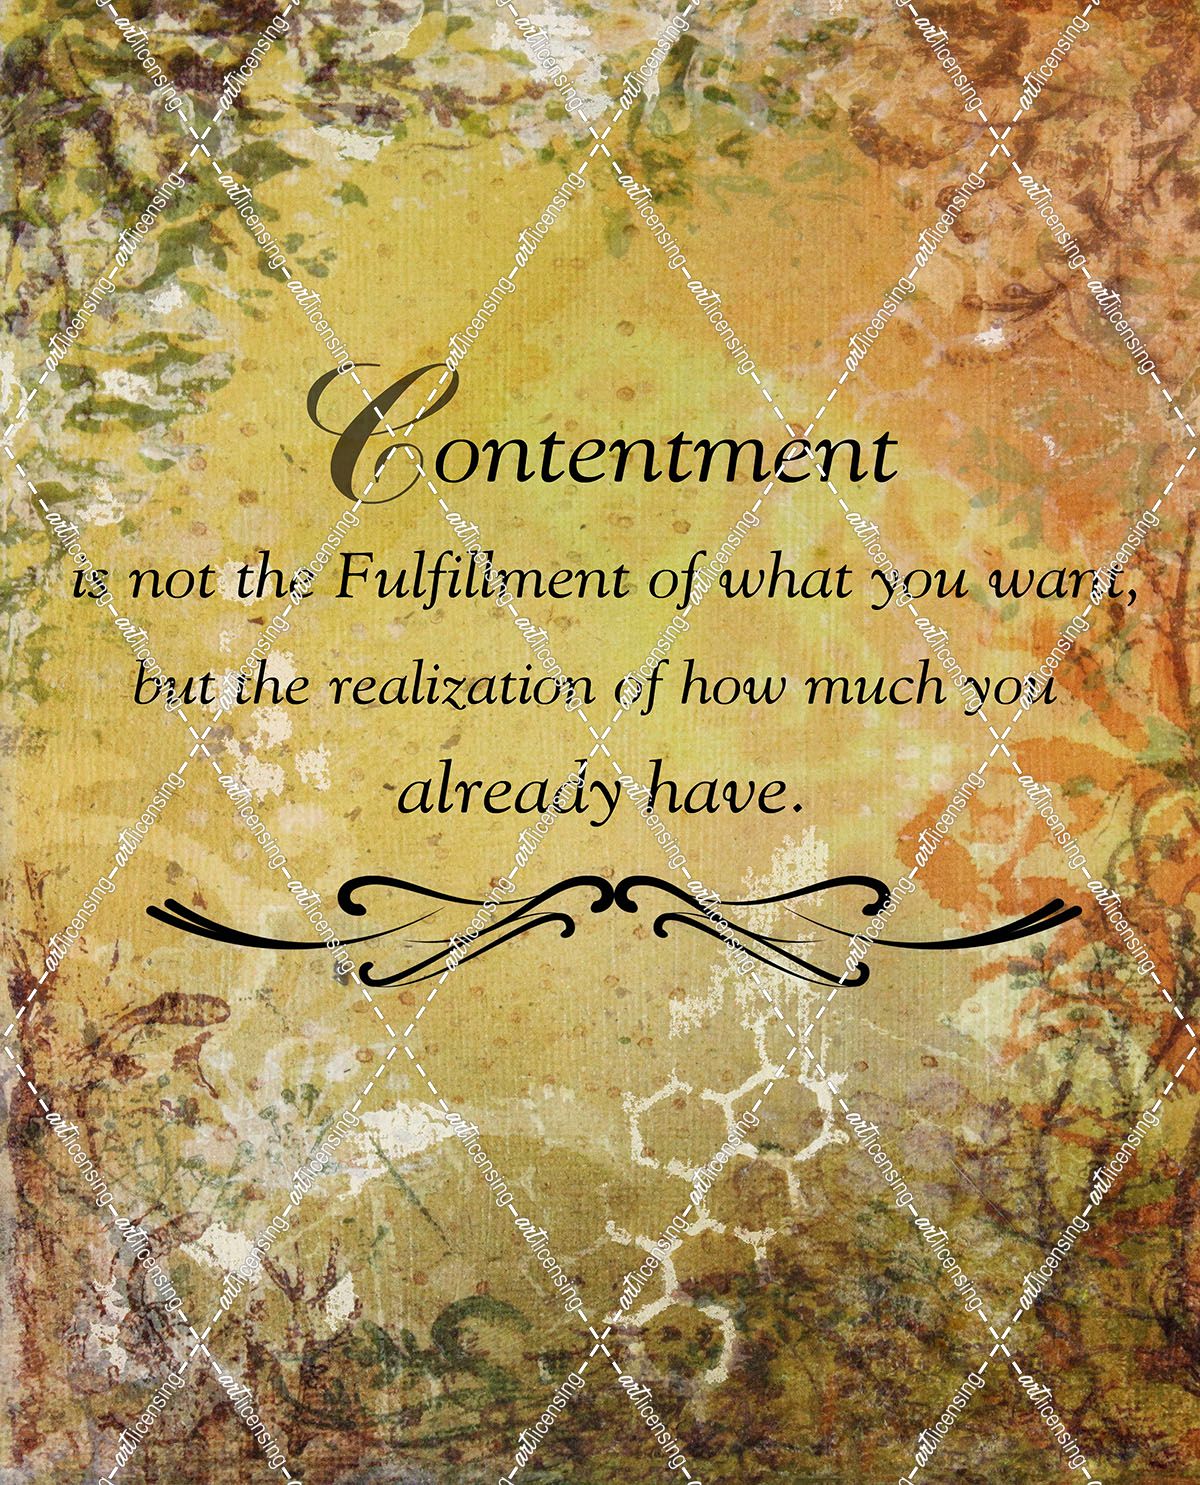 Contentment (earth theme)